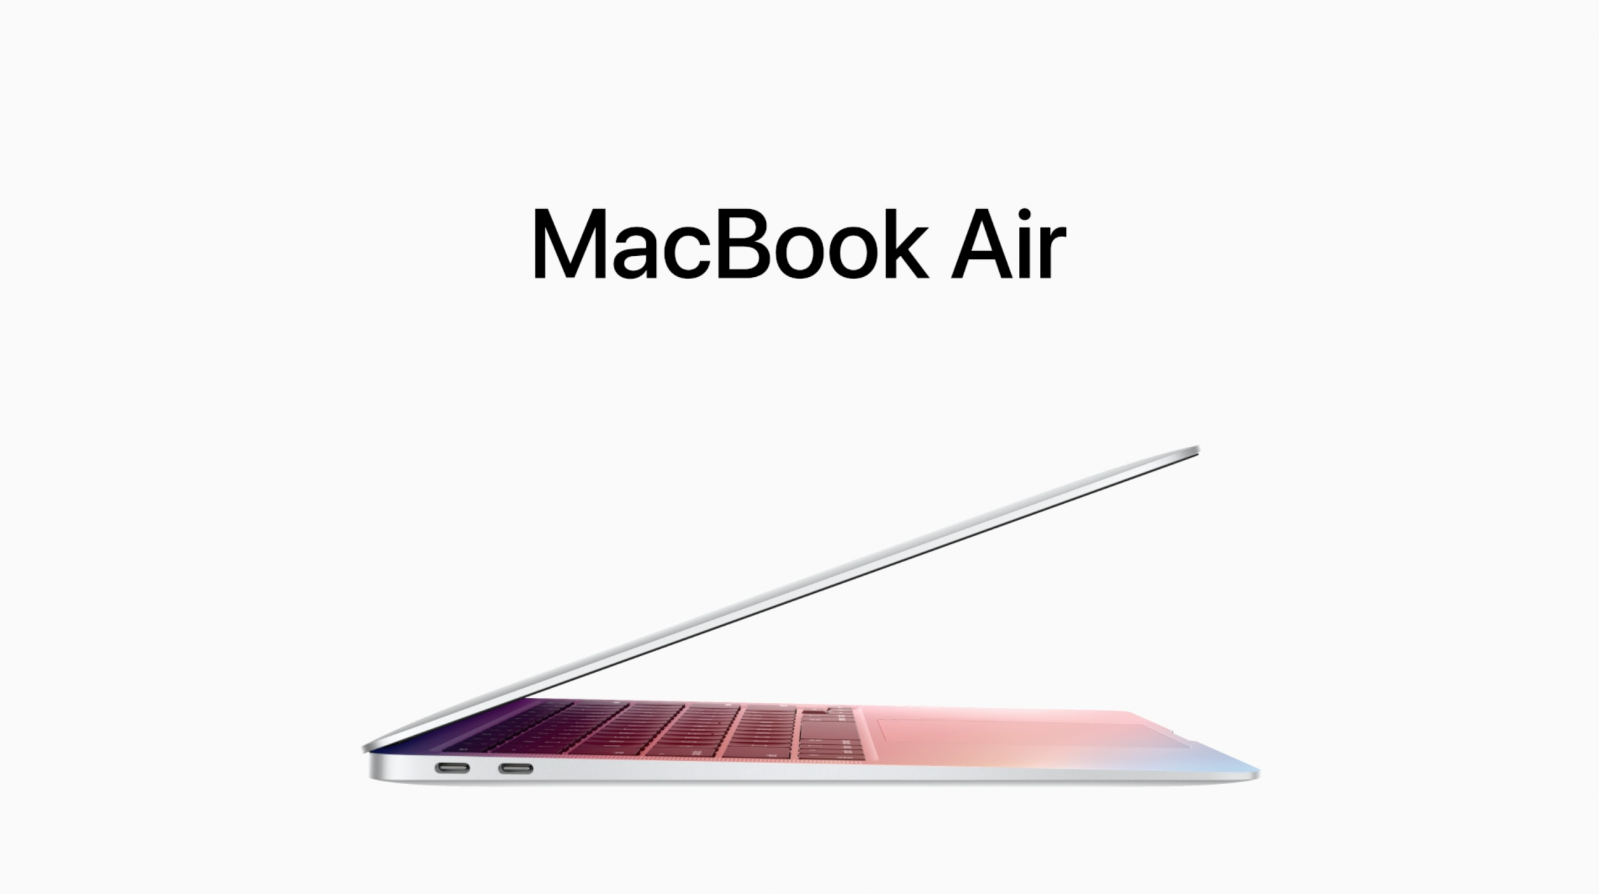 Apple MacBook Laptops to Look More Like iPhone Thanks to Apple Silicon